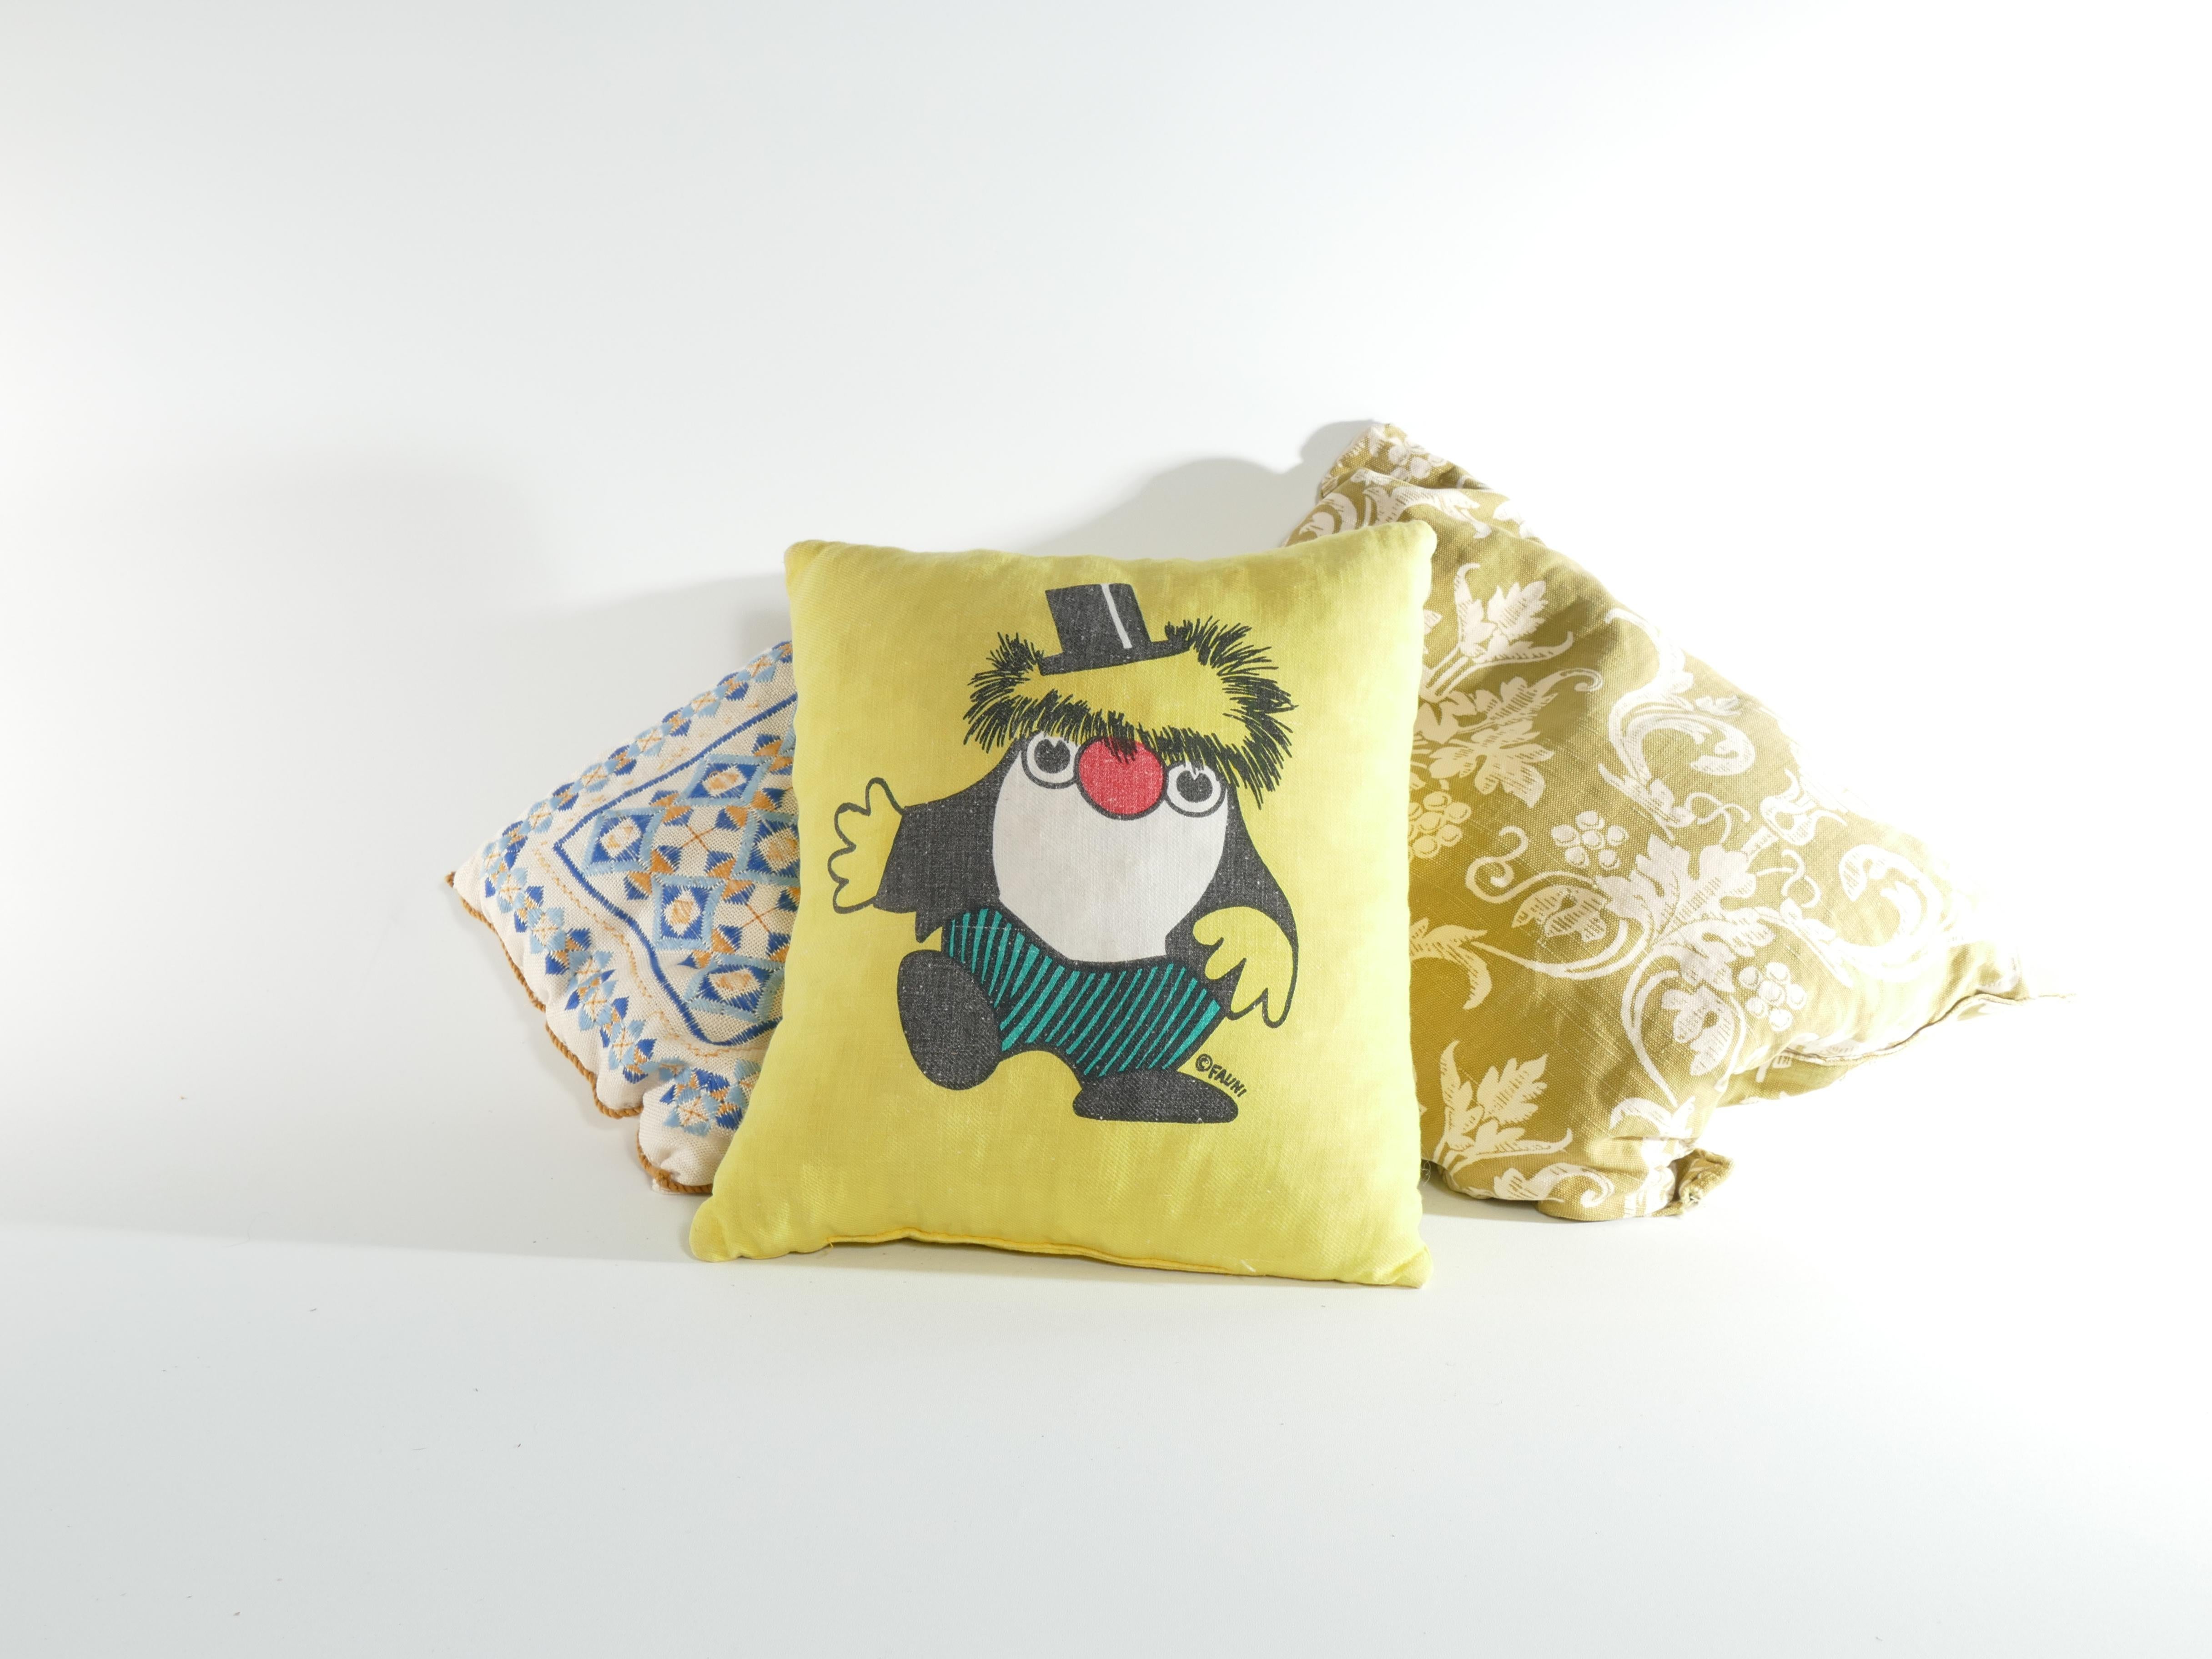 1970’s Atelier Fauni Yellow  Pillow Depicting Mr Edward the Business Troll  For Sale 3